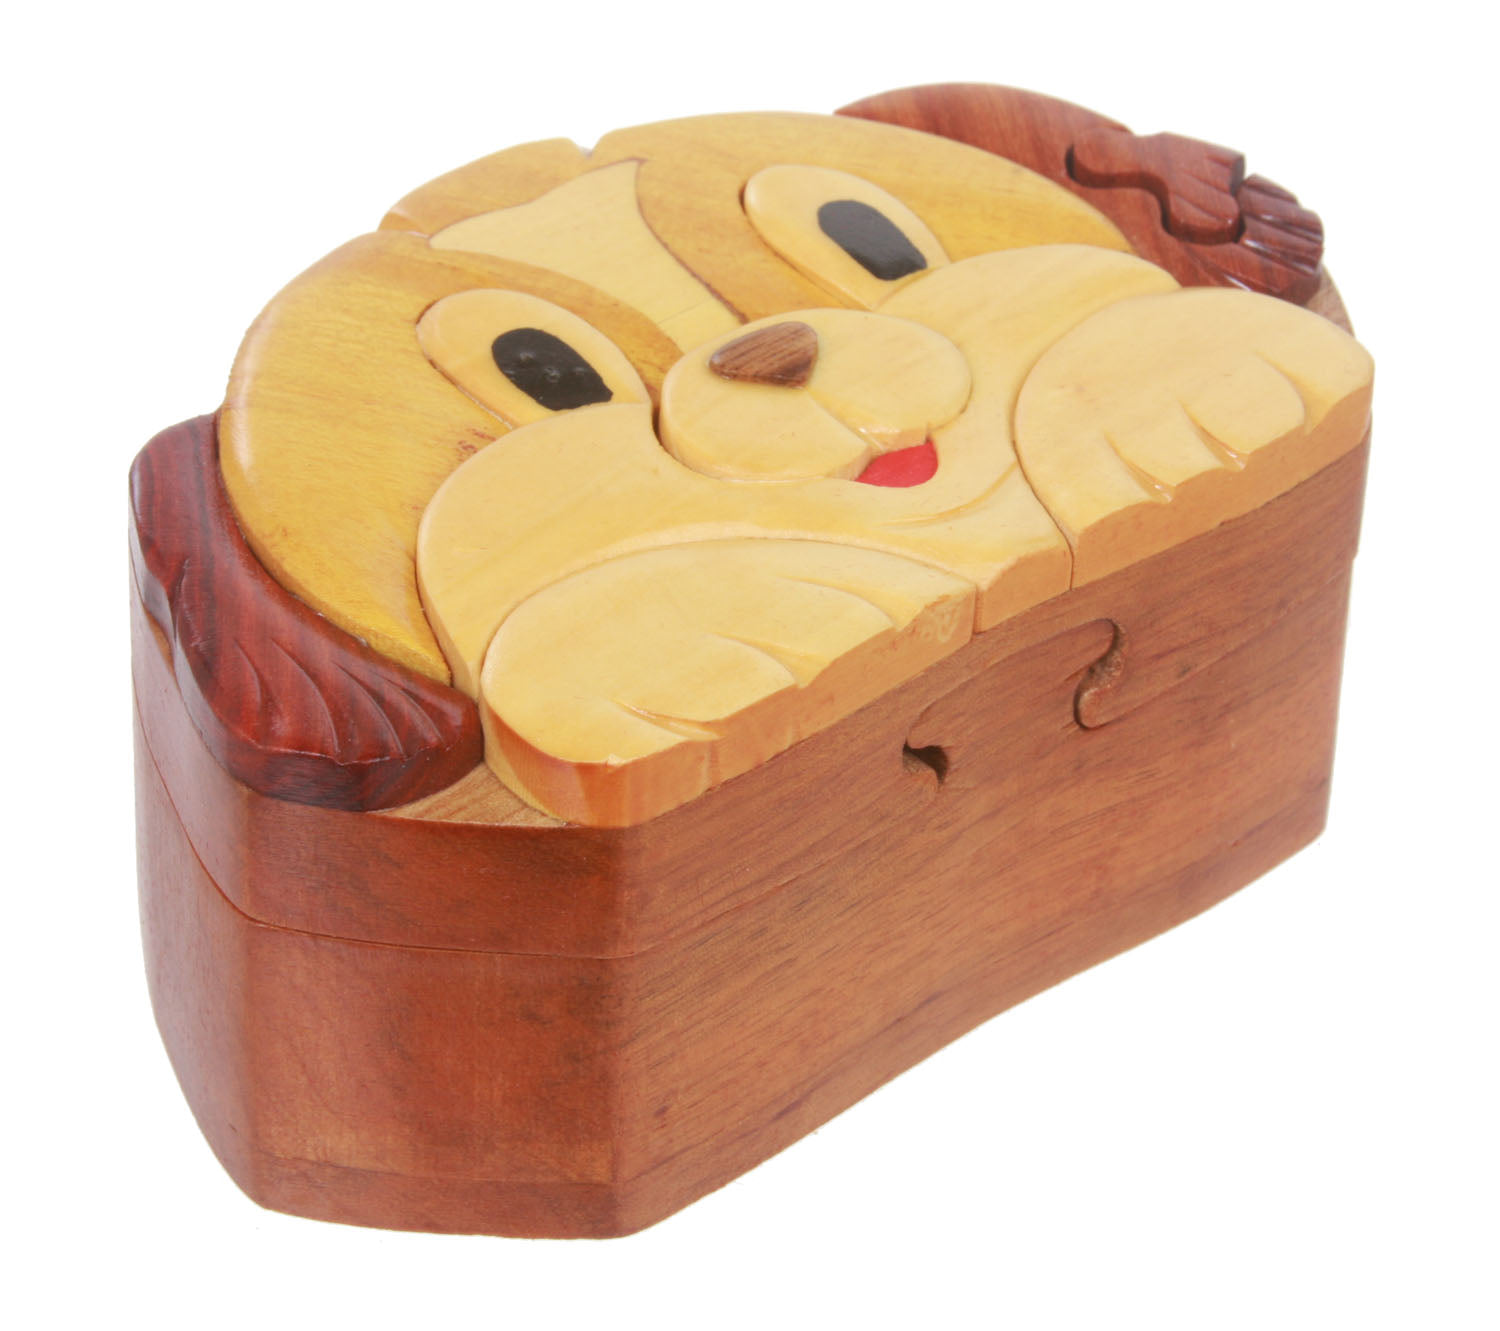 Handcrafted Wooden Dog Shape Secret Jewelry Puzzle Box - Puppy